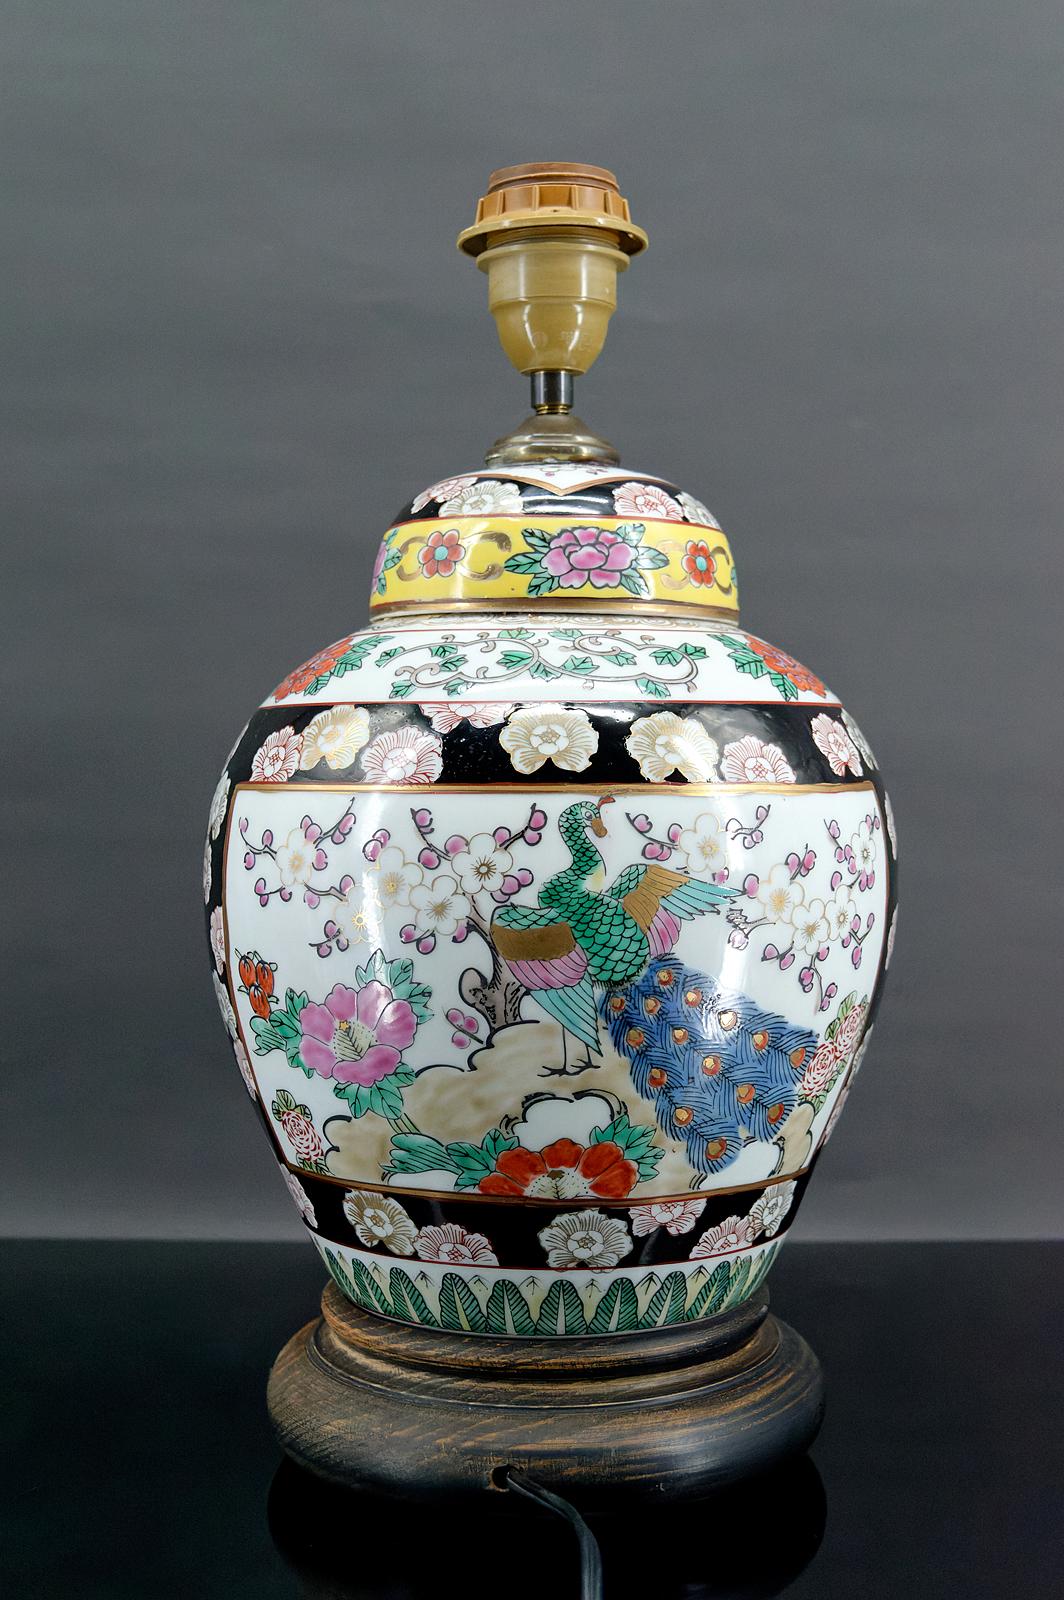 Painted Chinese porcelain lamp decorated with flowers and peacocks, China, Early 20th For Sale